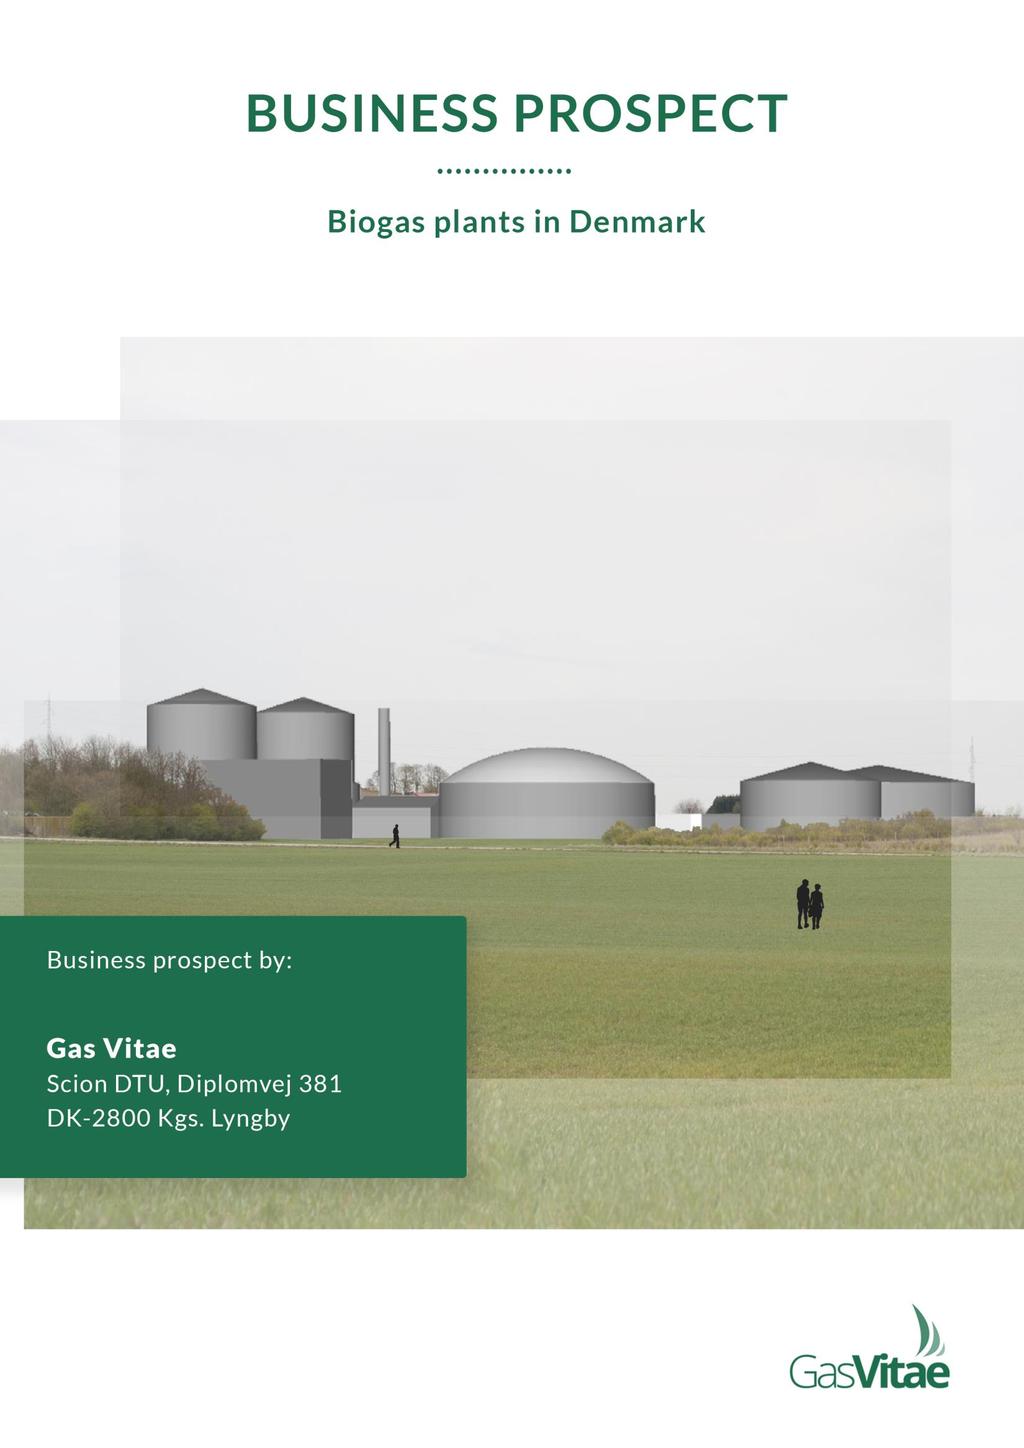 BUSINESS PROSPECT - BIOGAS PLANTS IN